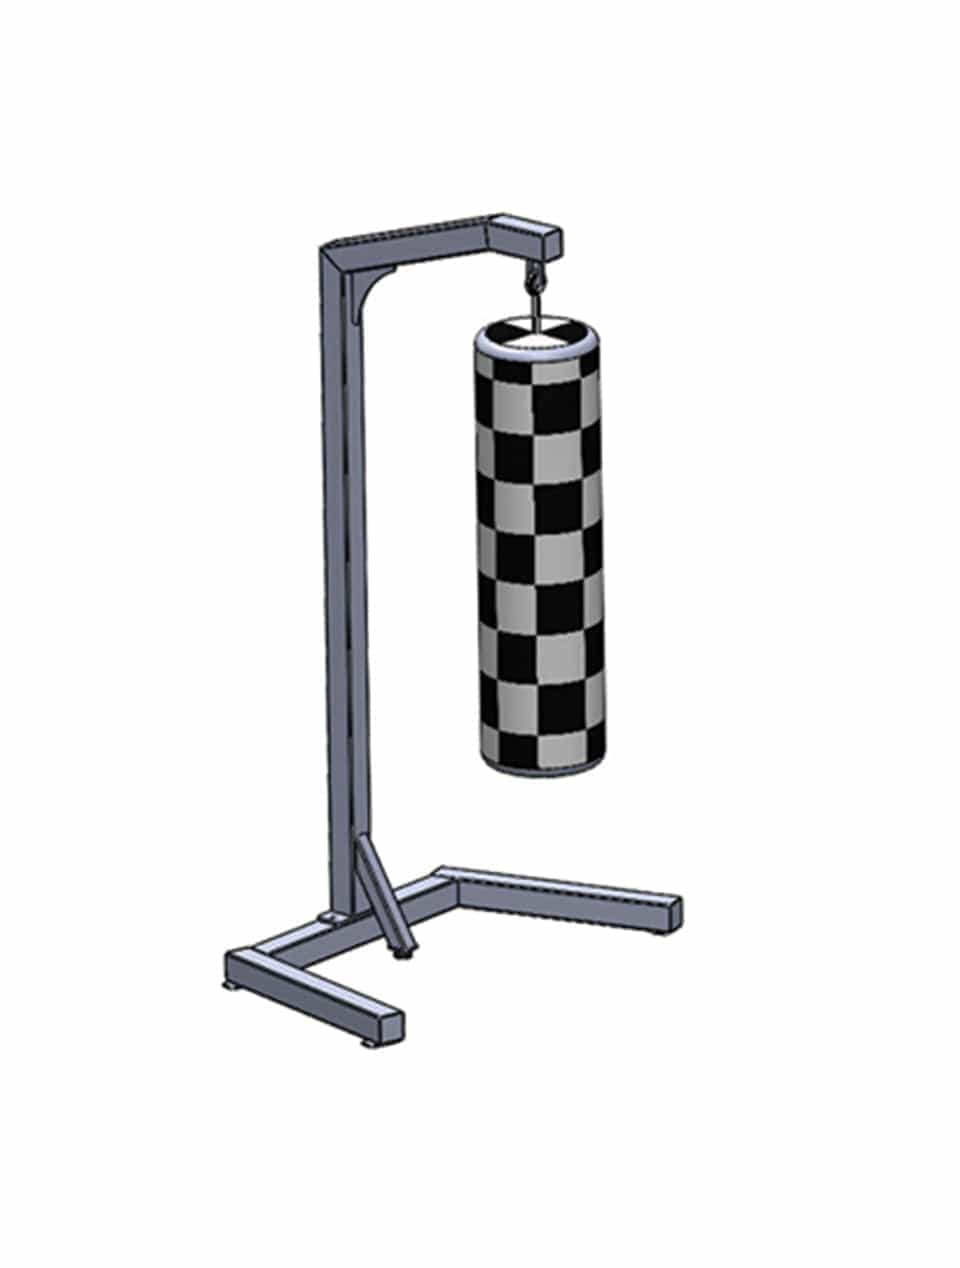 PRSAE Punching Bag Stand 1441 Fitness Punching Bag Stand - 41FC22